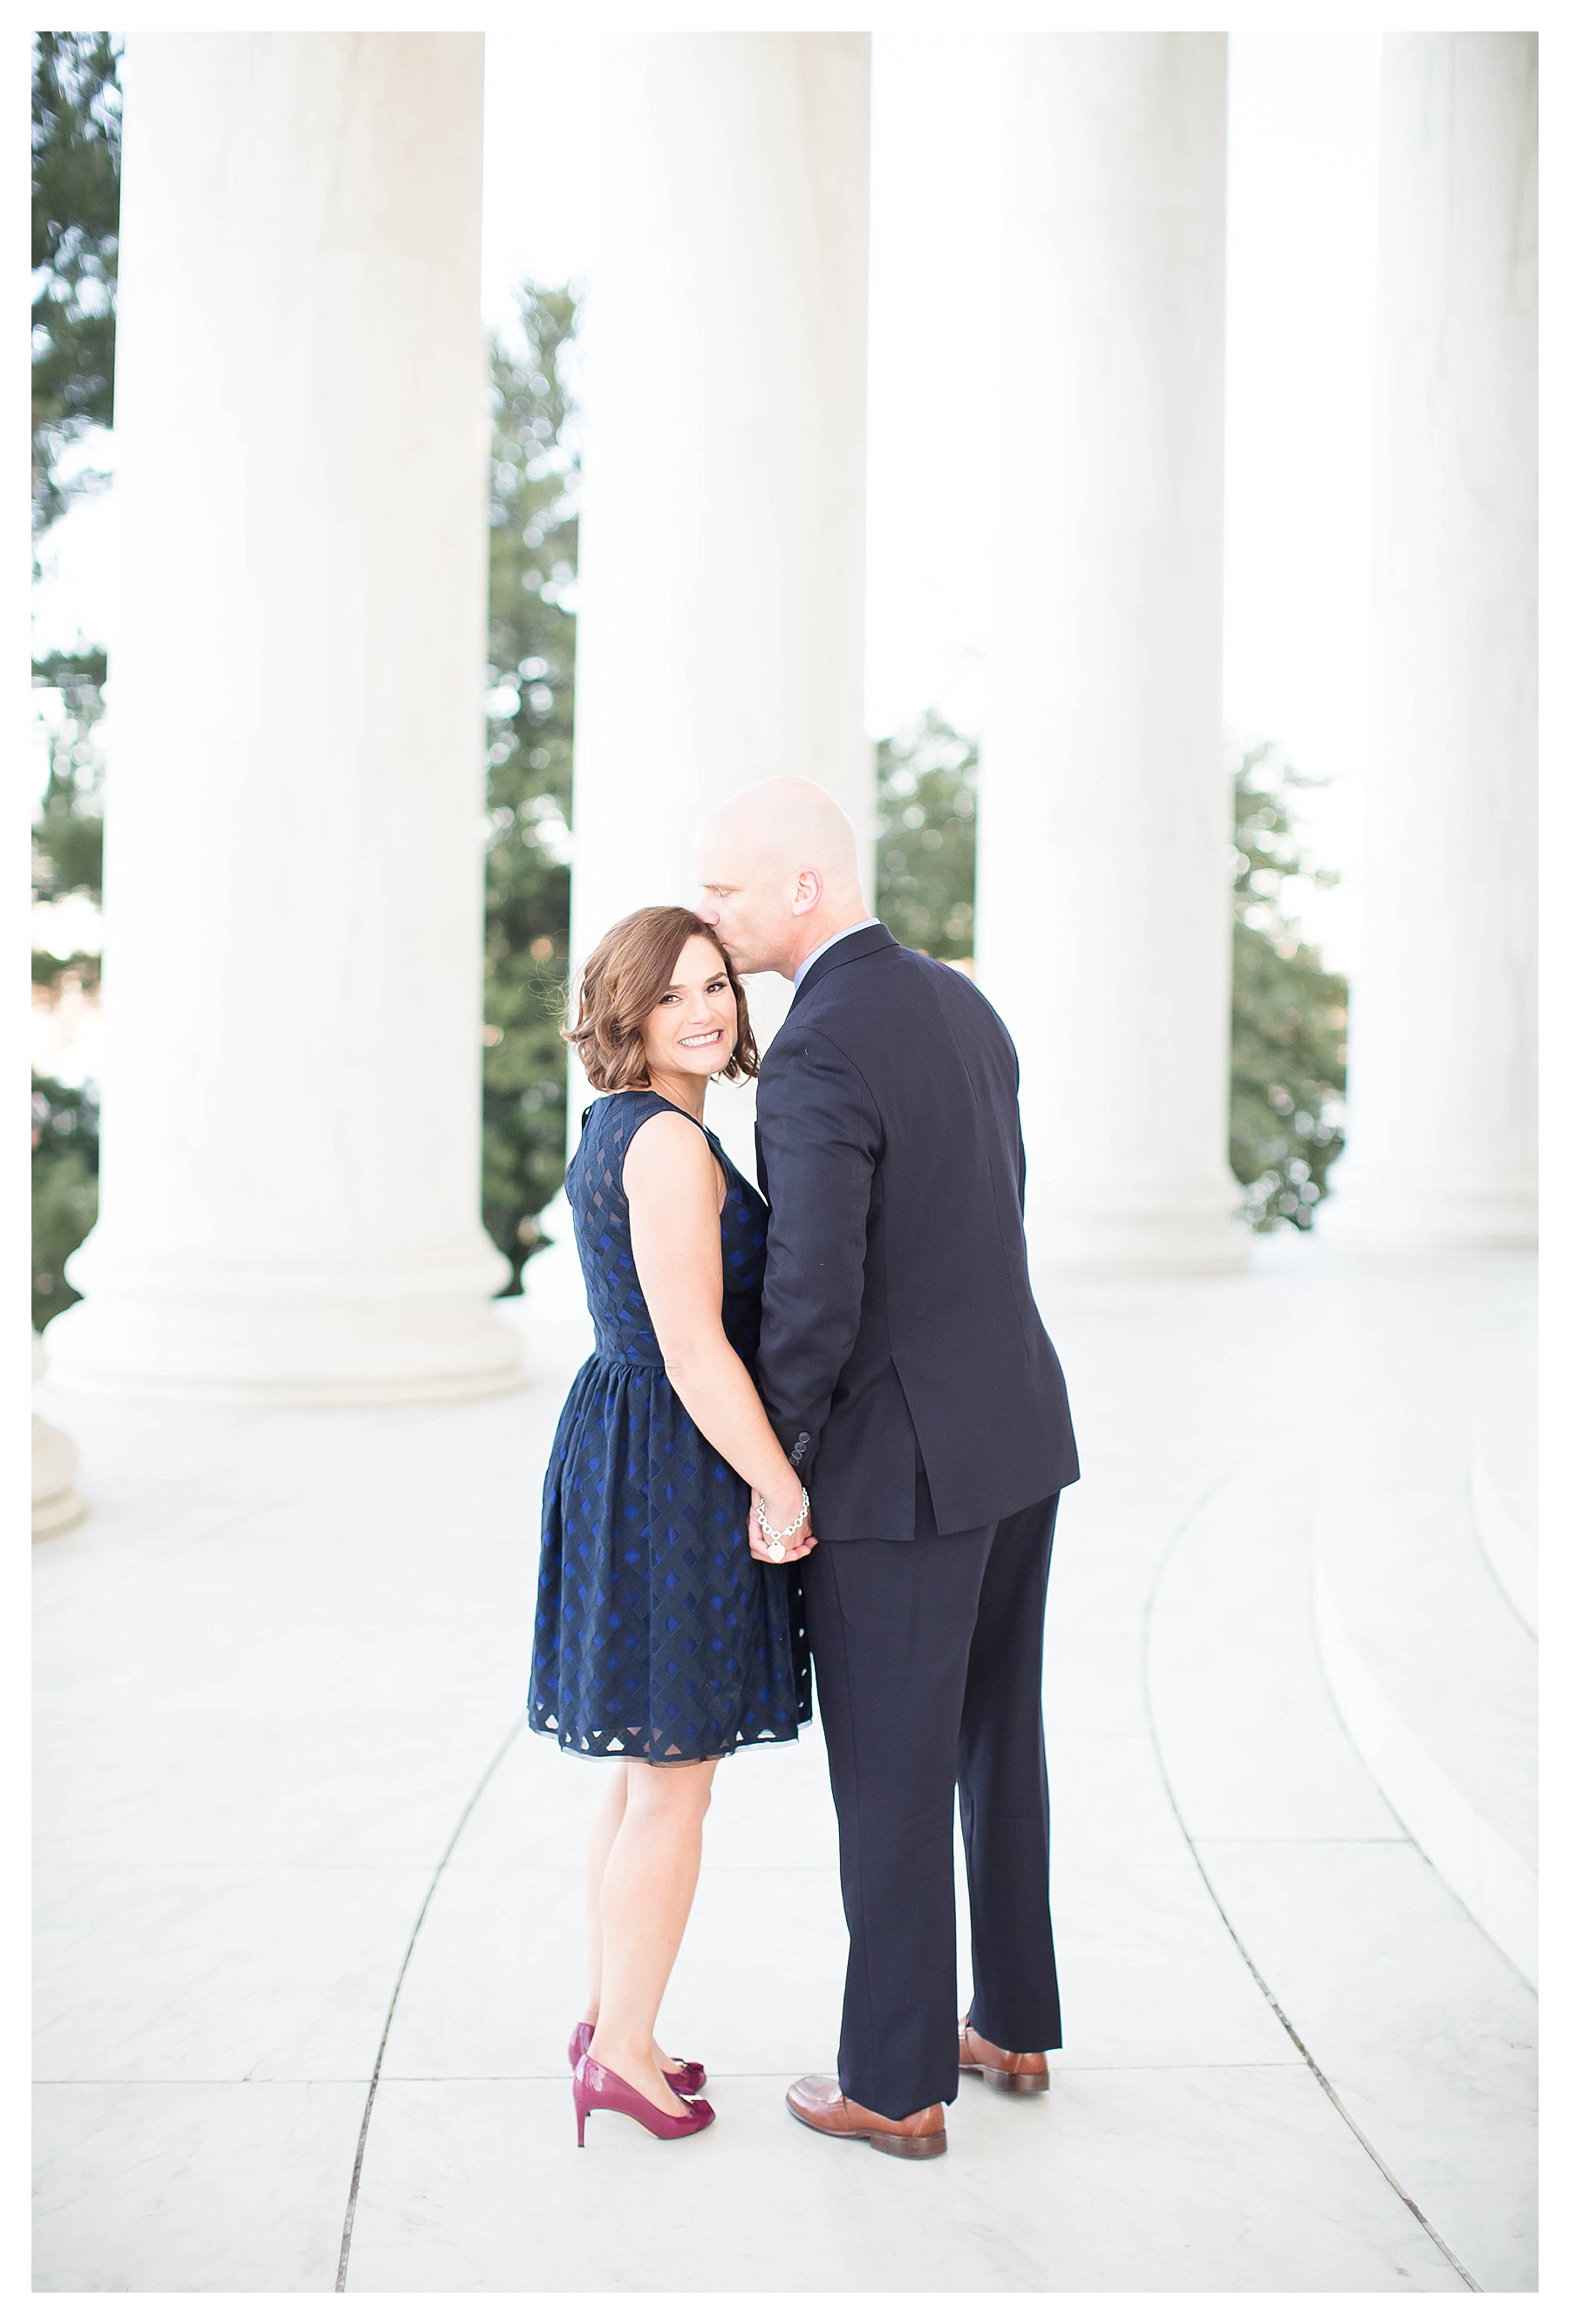 Candice Adelle Photography DC Destination Wedding Photographer Cherry Blossom Engagment Session_0047.jpg